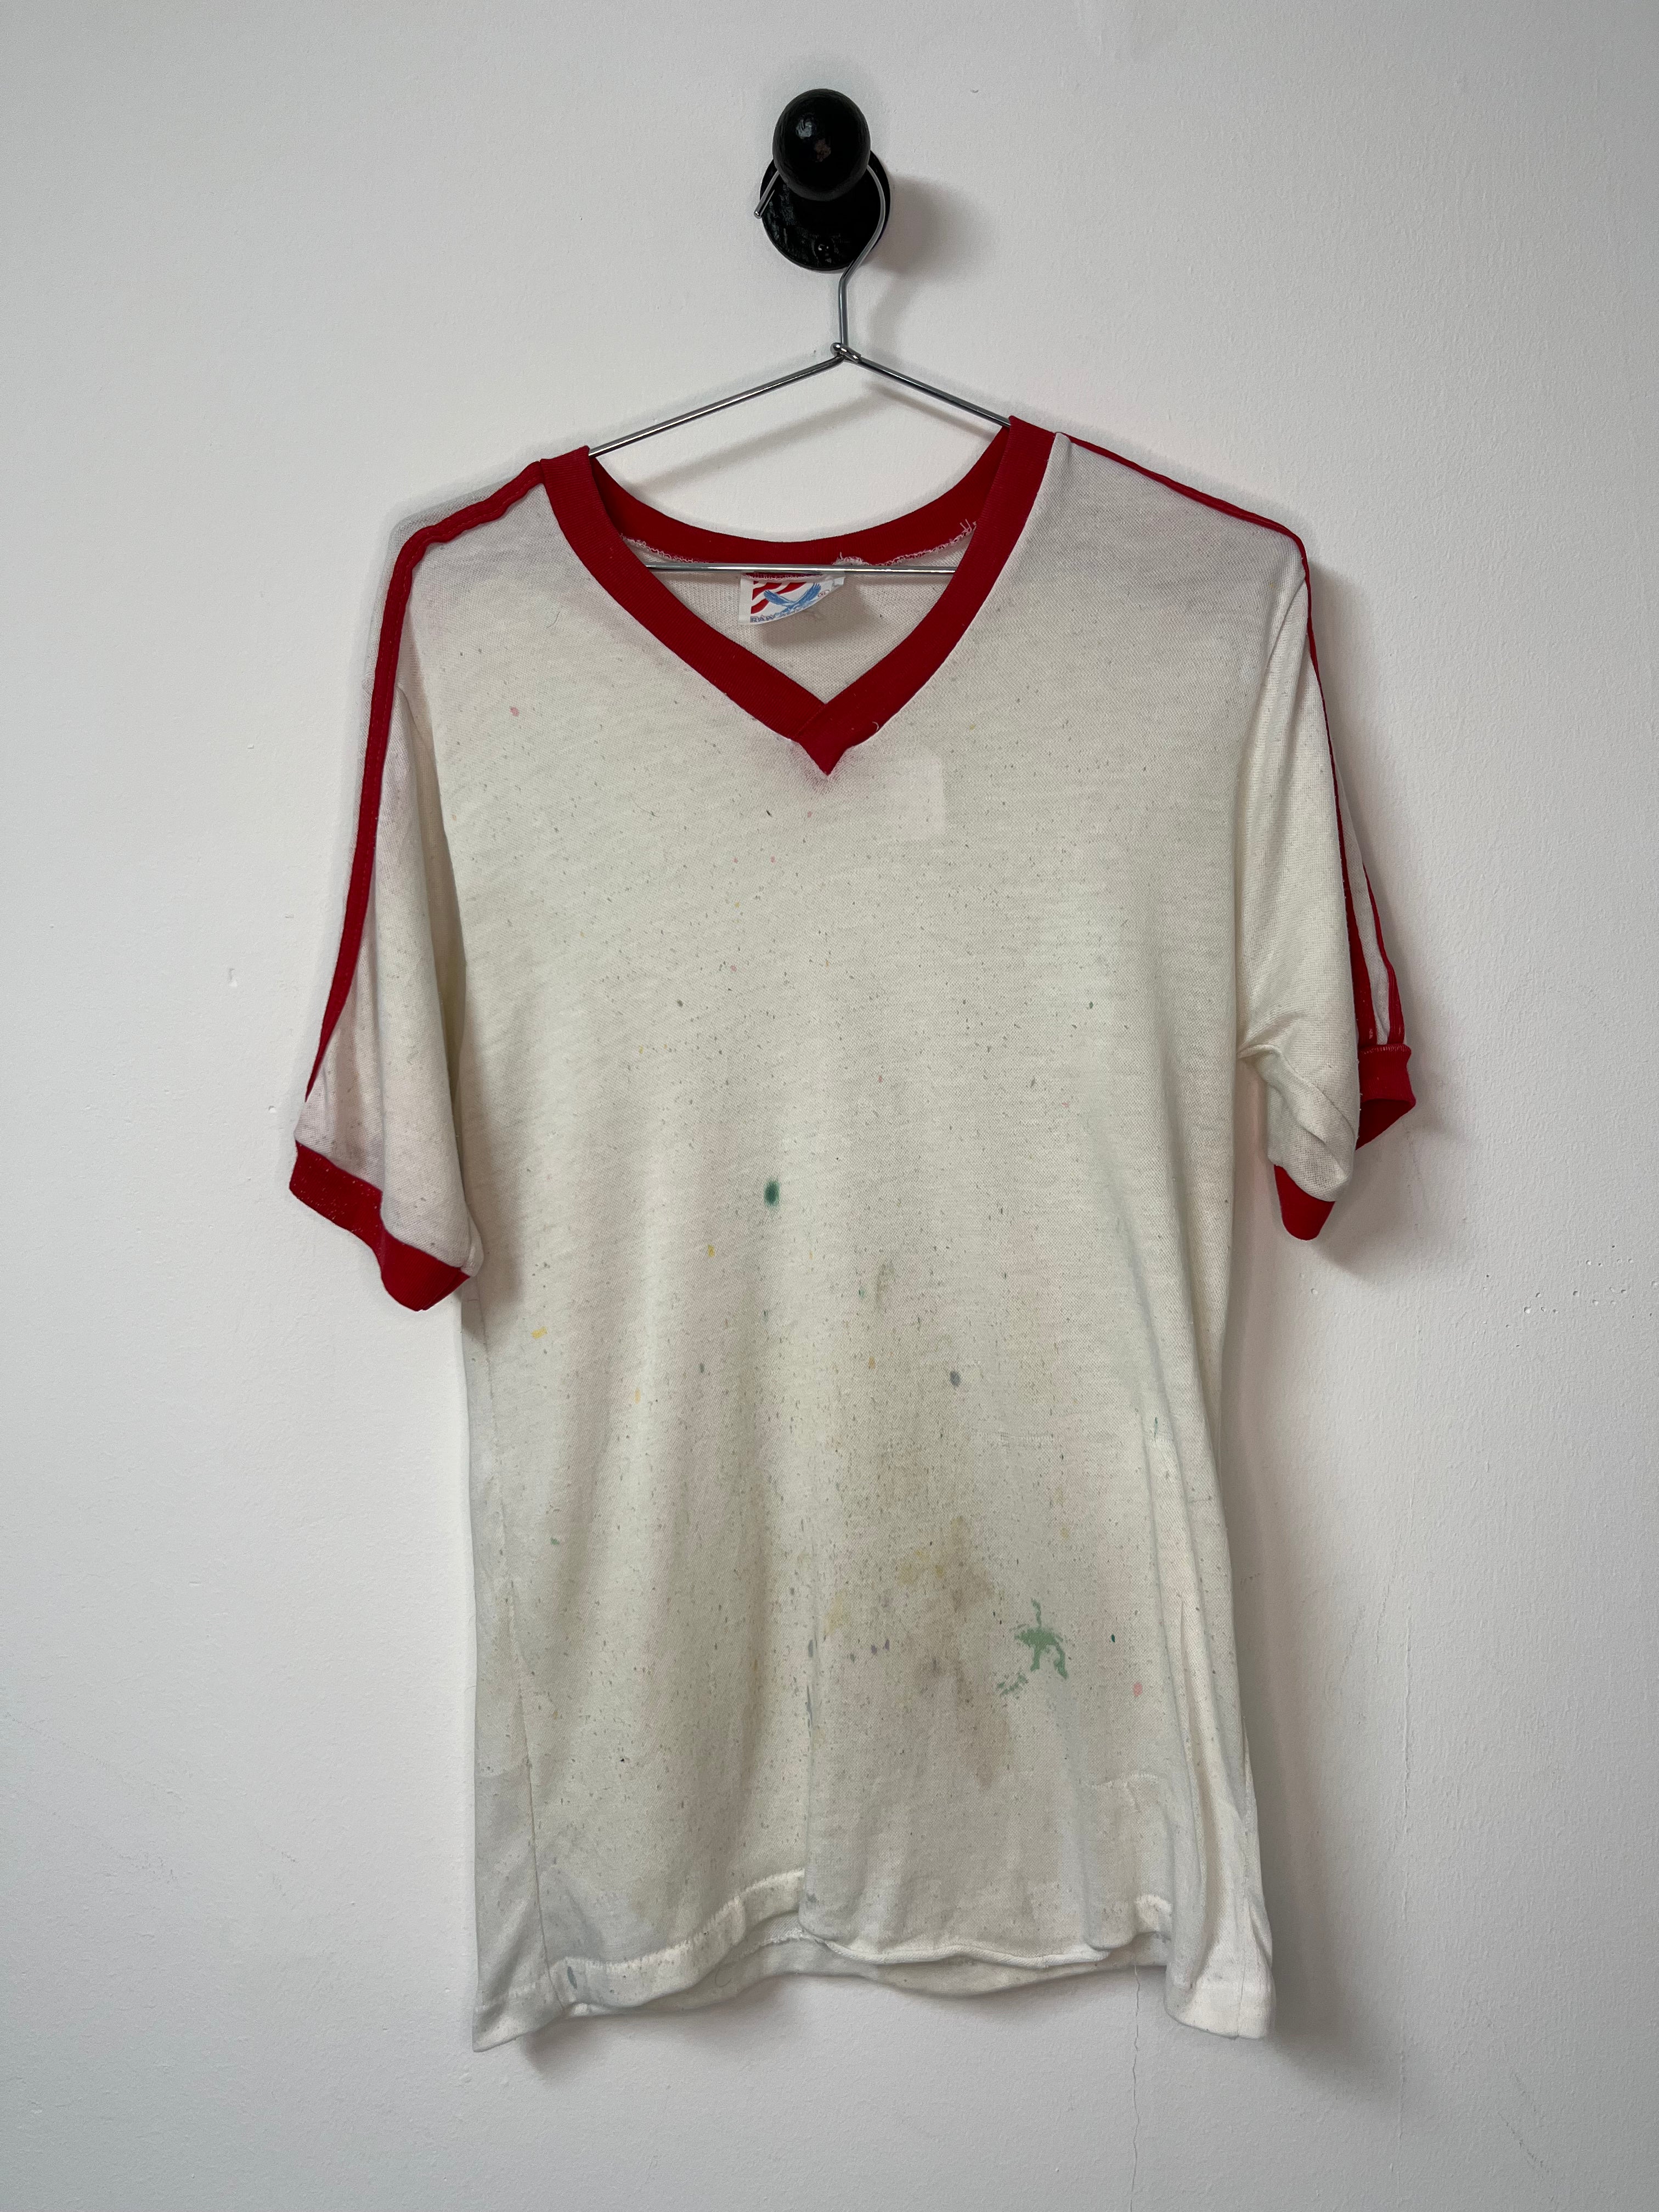 Vintage 1970's Adidas Red Ringer T Shirt | Size S